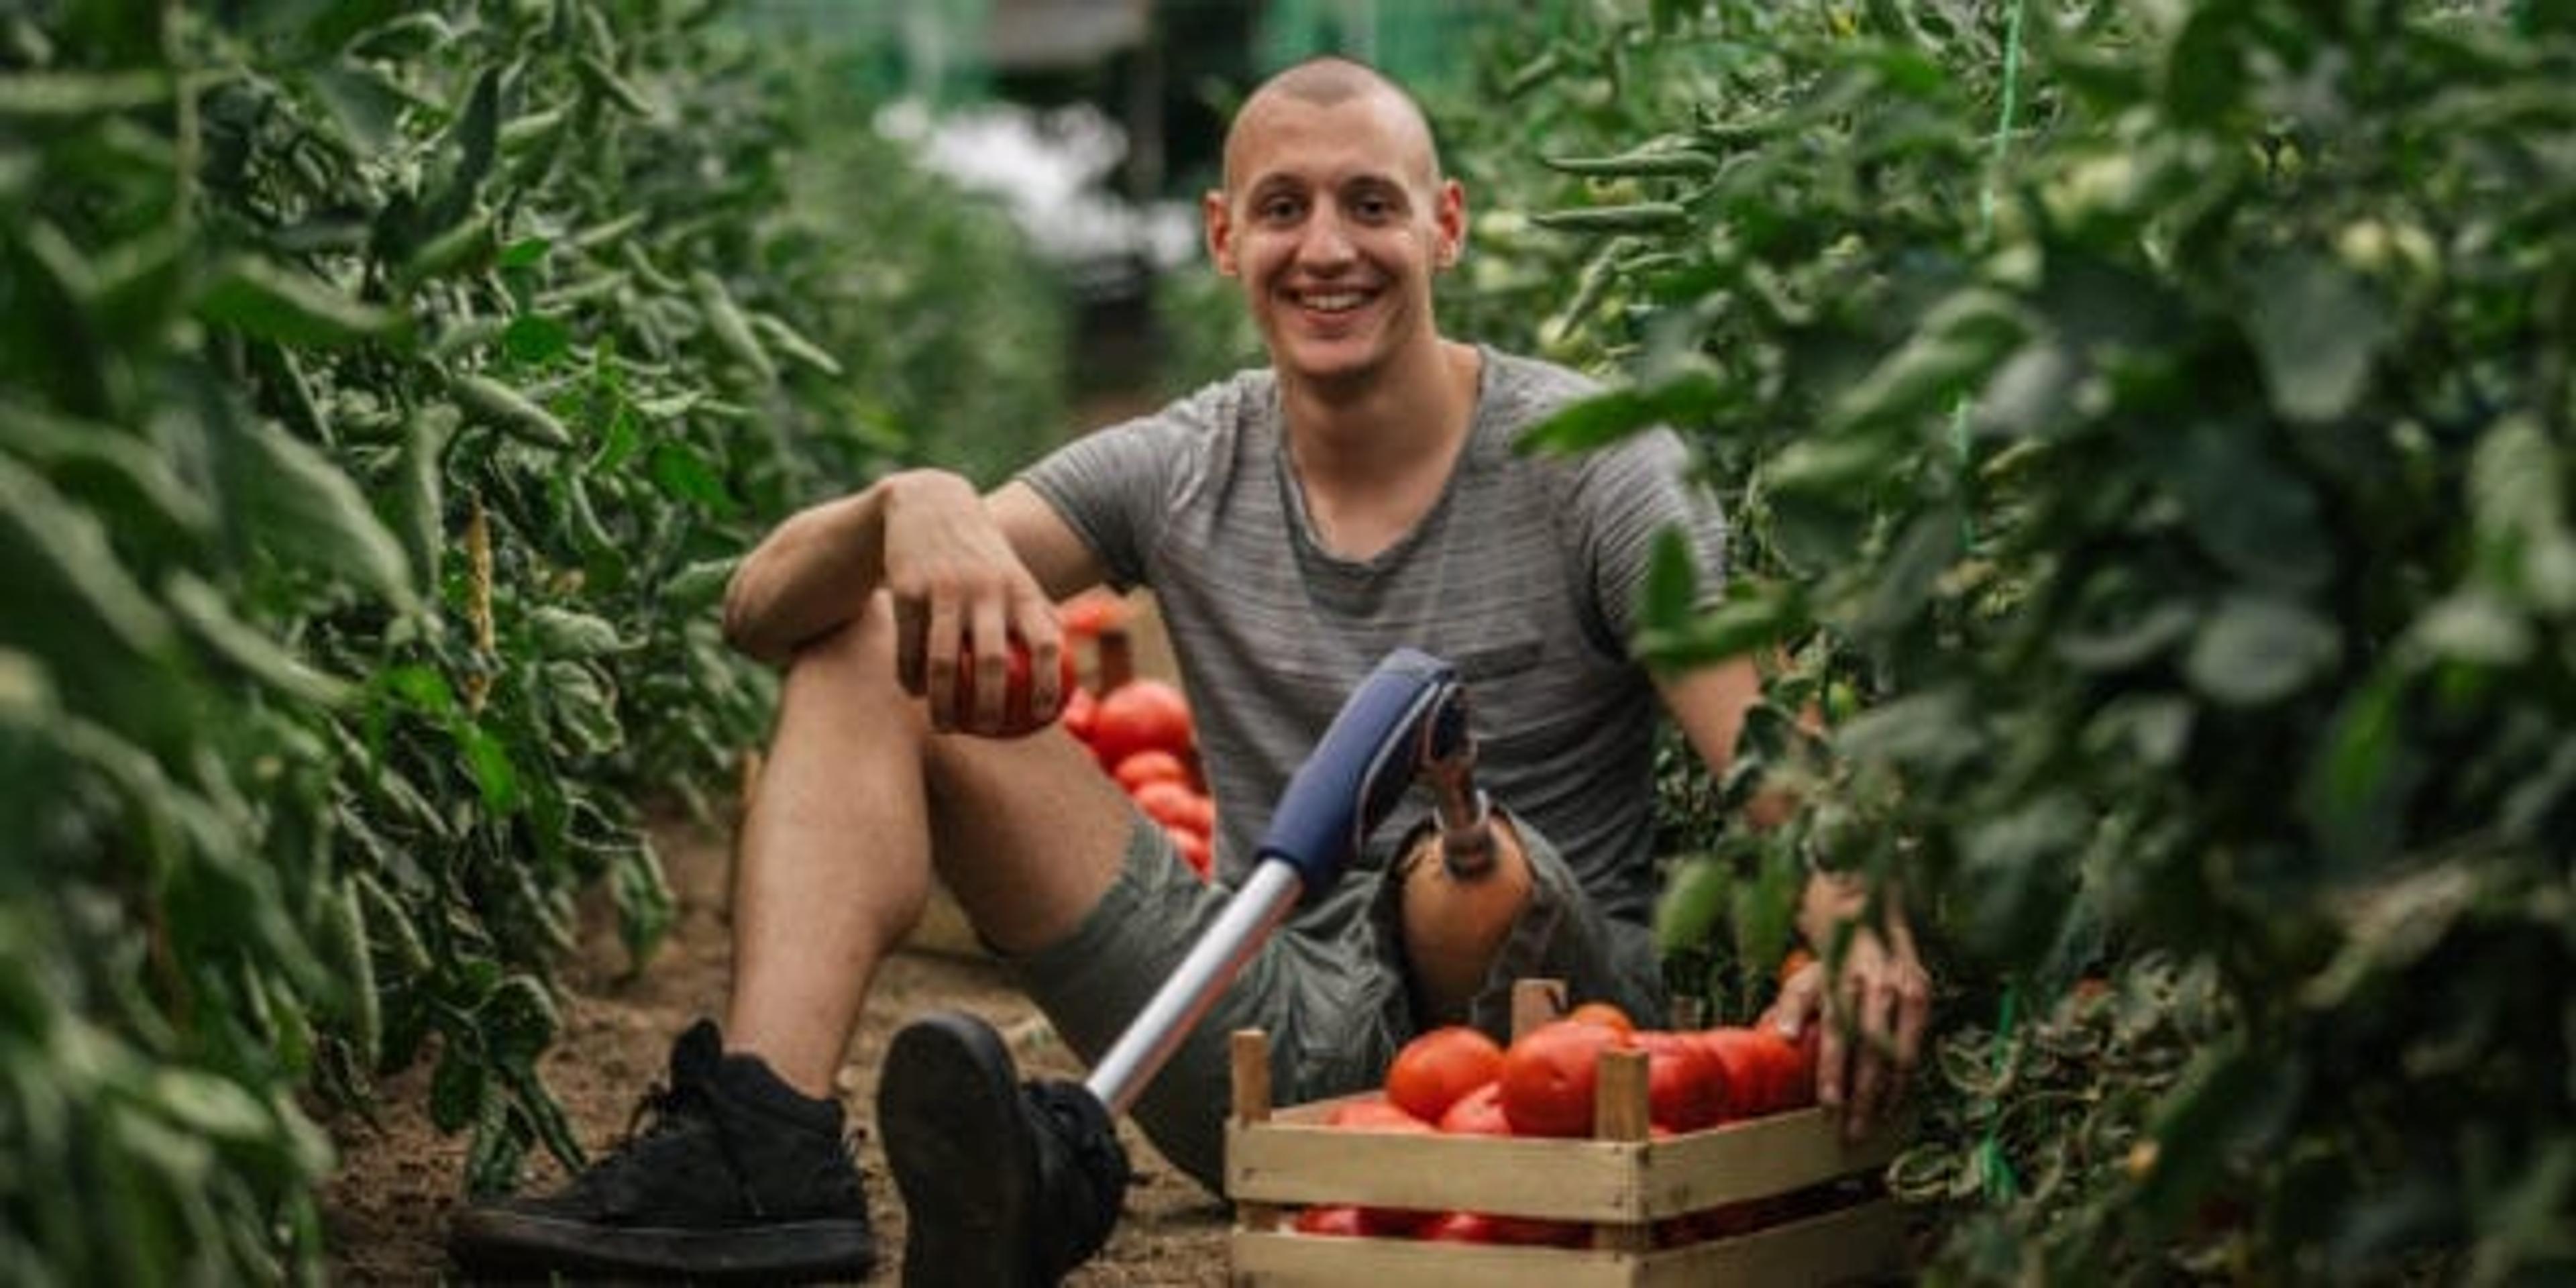 Young farmer with prosthetic leg picking tomato in greenhouse